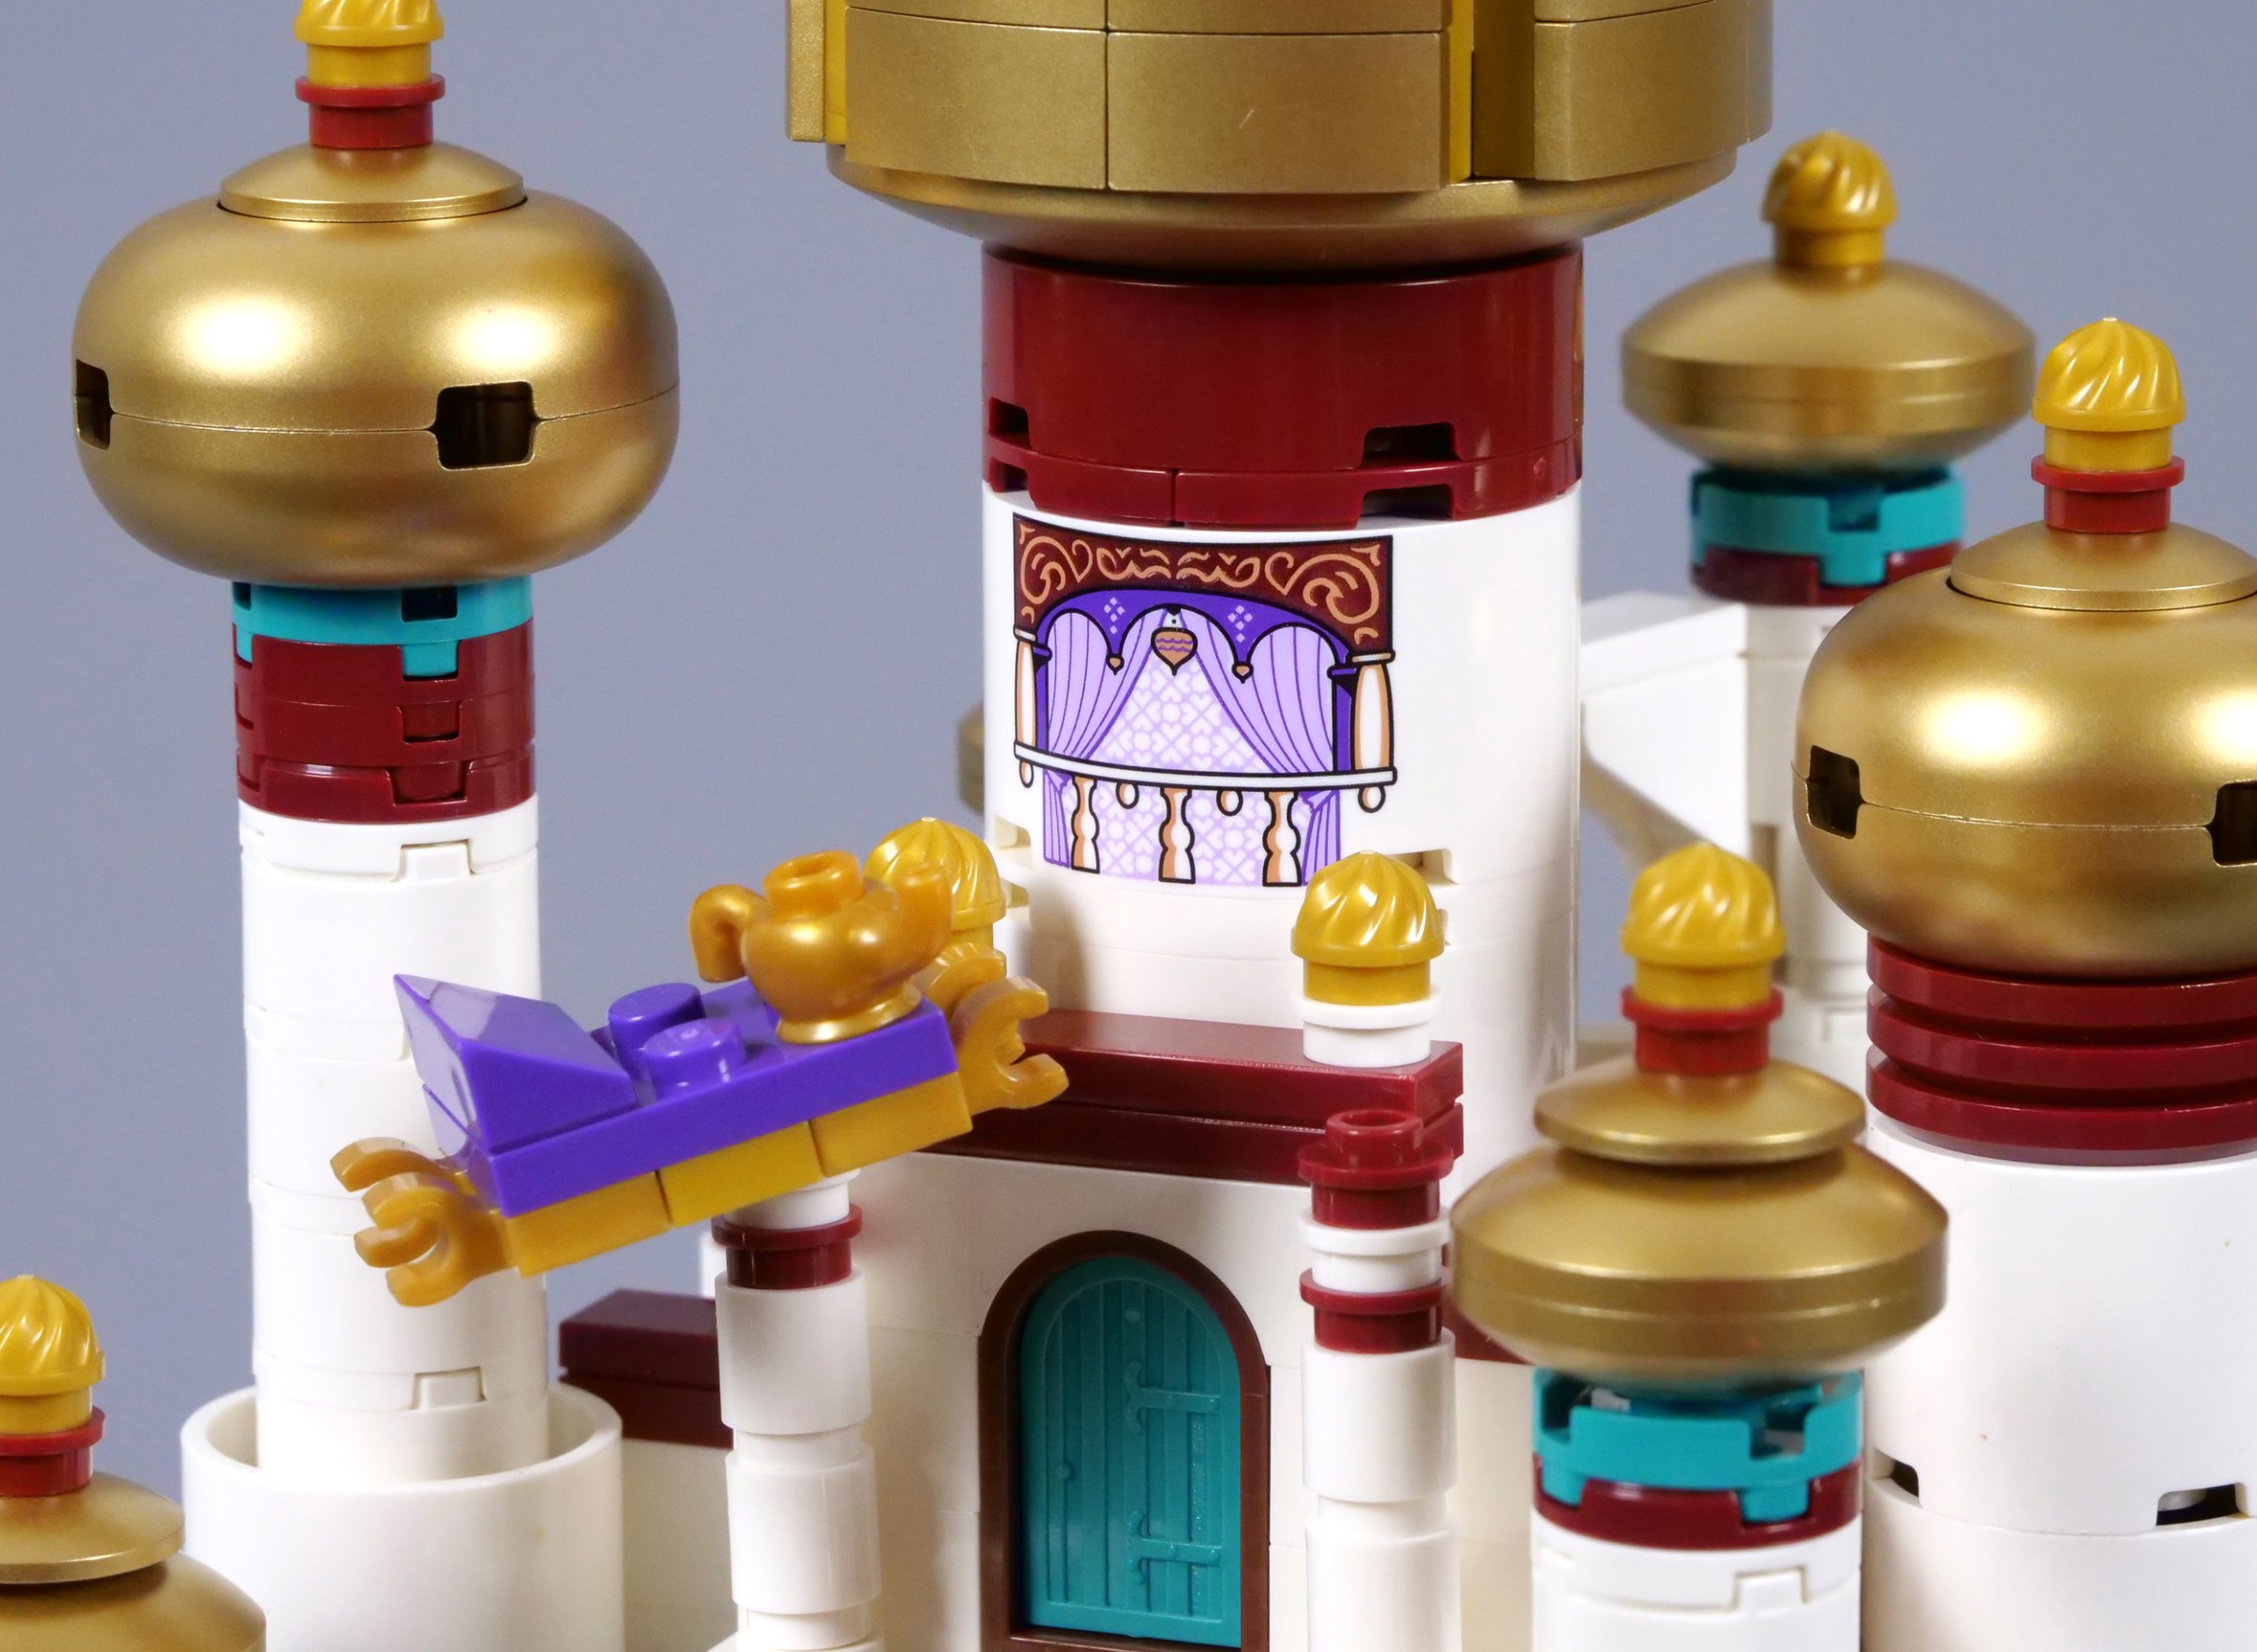 LEGO 40613 Mini Disney Palace of Agrabah review